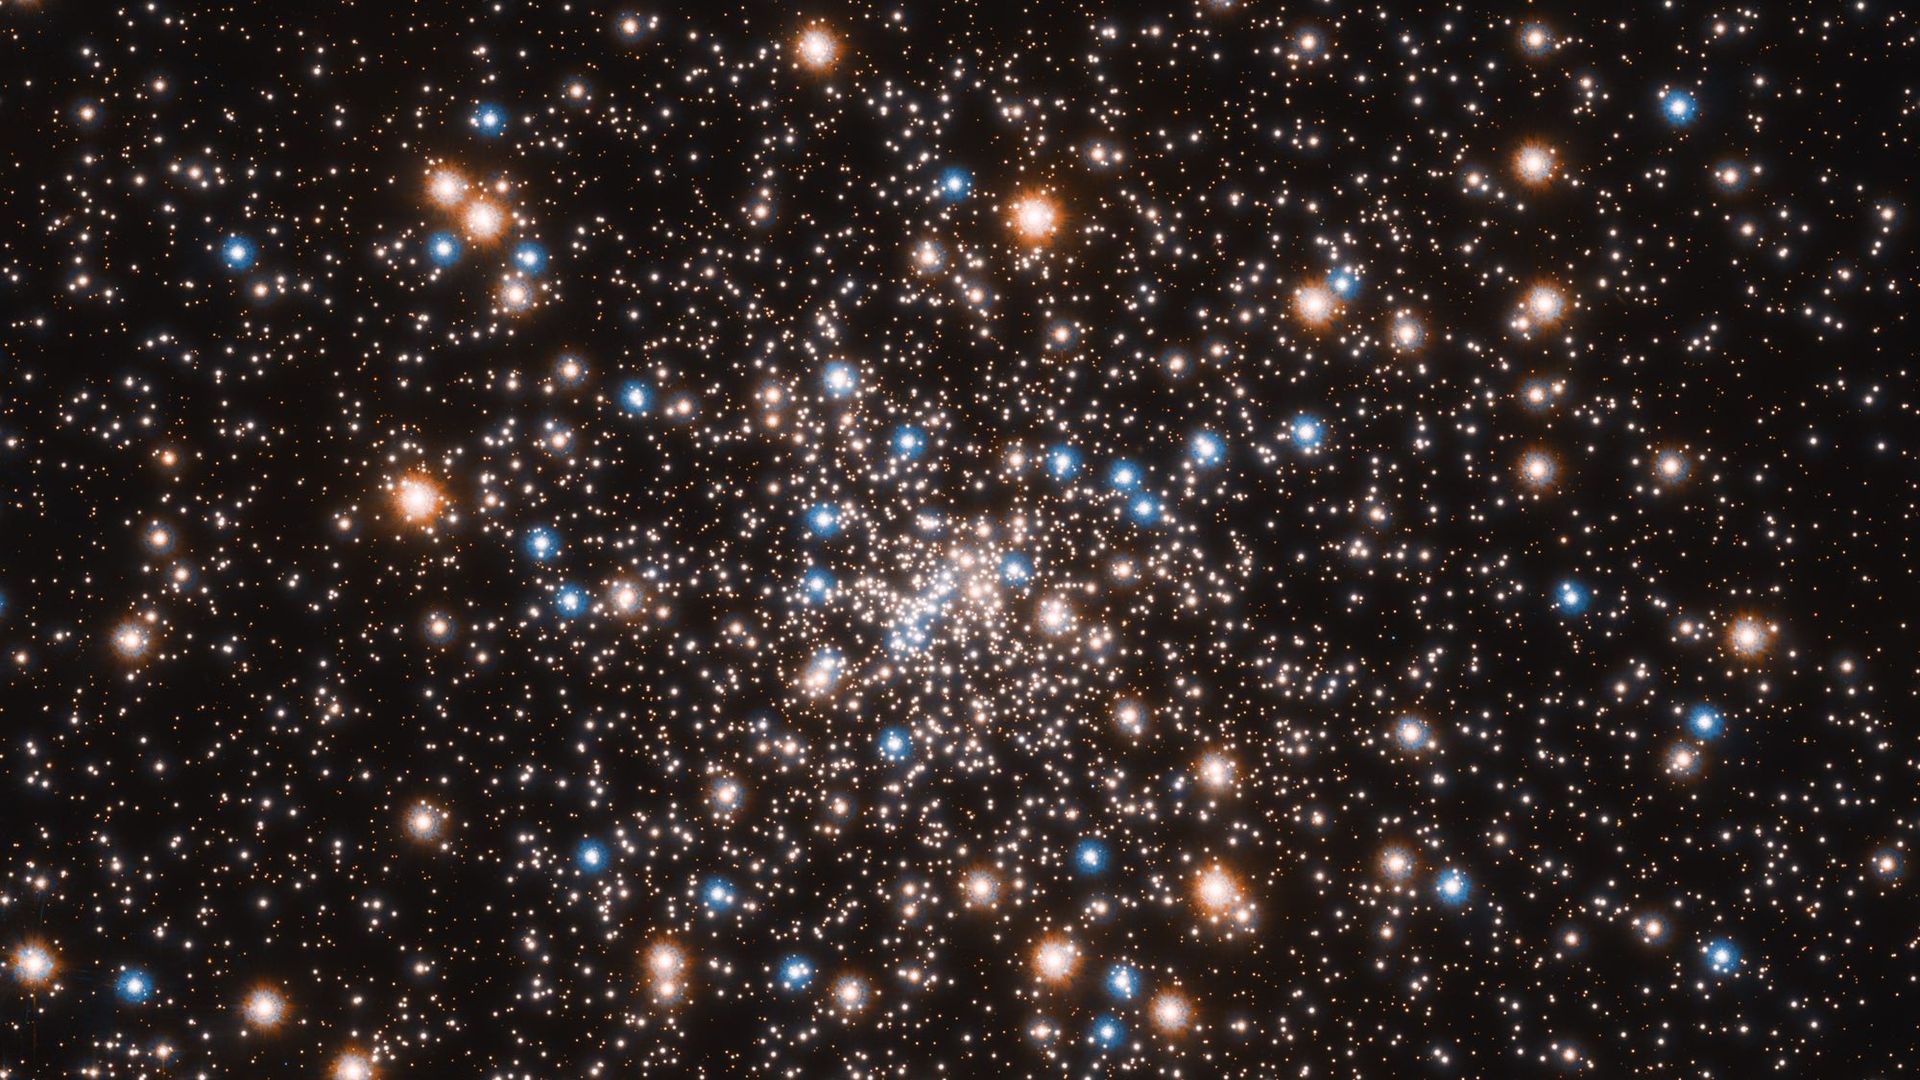 A star cluster shines, with blue, orange and white stars clustered around a central grouping of stars